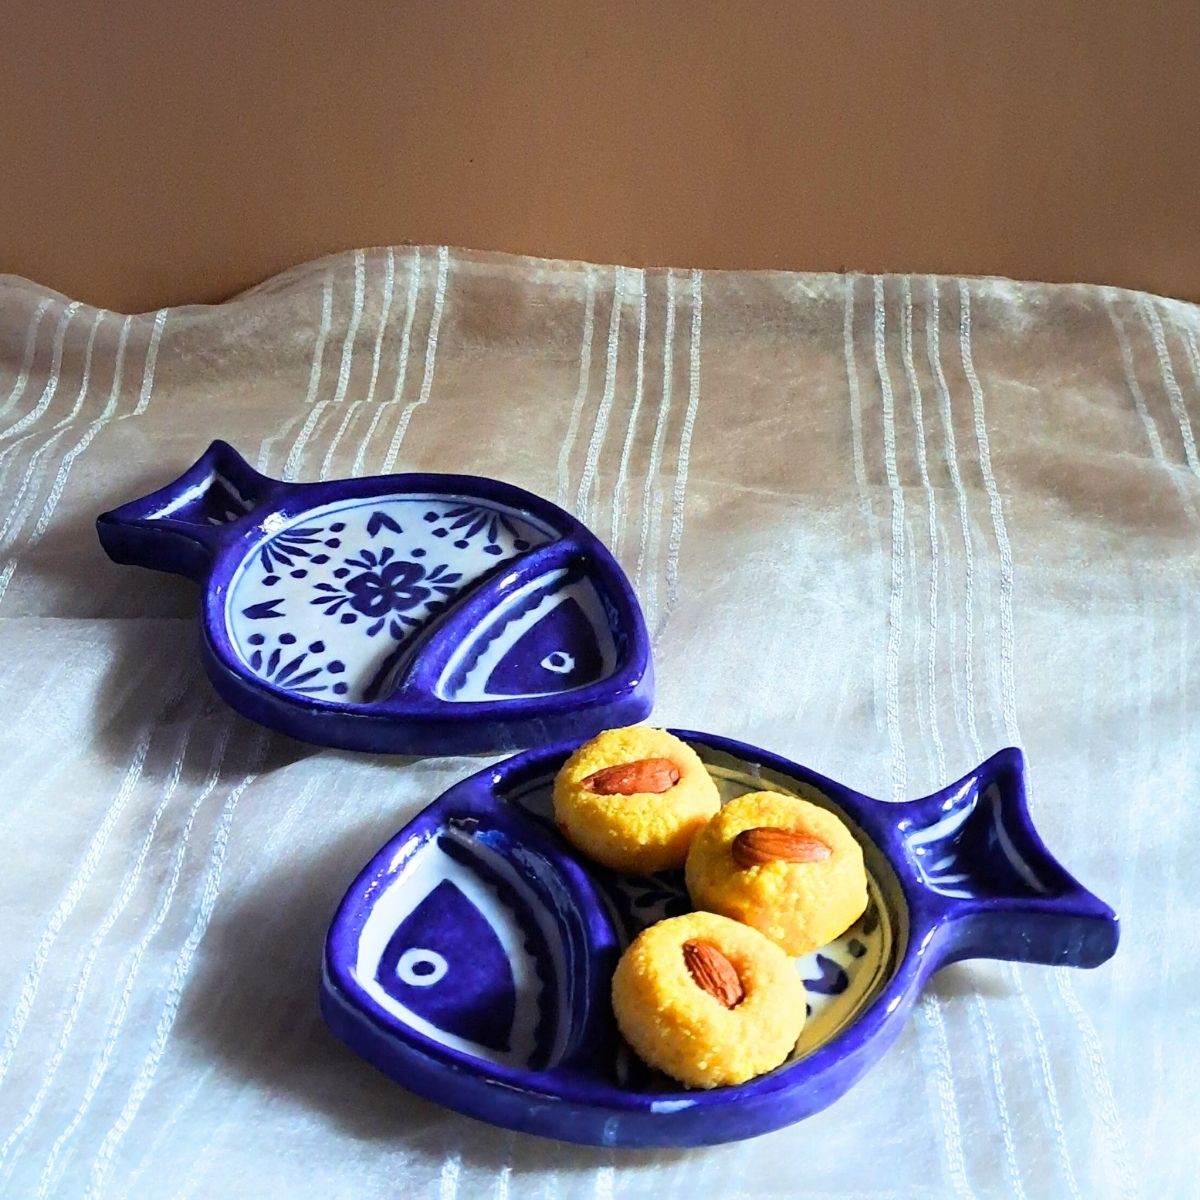 Jaipur Blue Pottery Round Fishy Plate